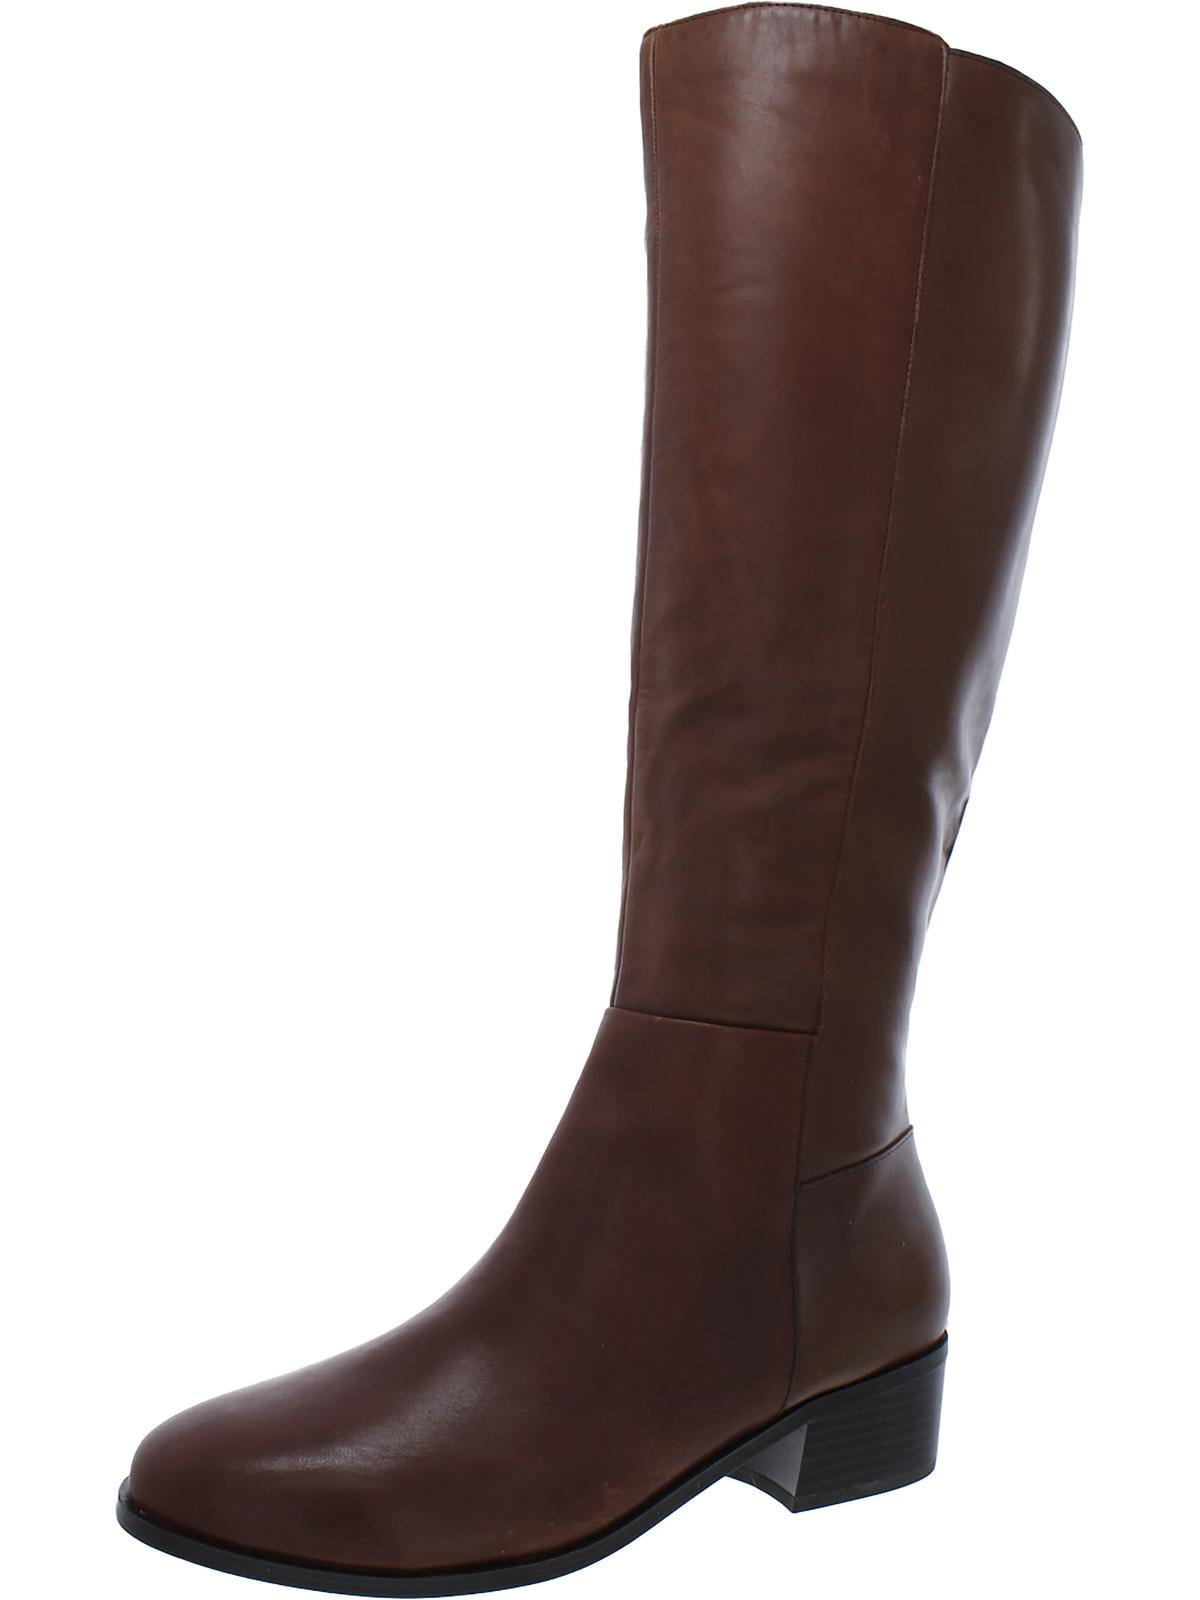 Rockport Womens Evalyn Leather Tall Knee-High Boots - Walmart.com